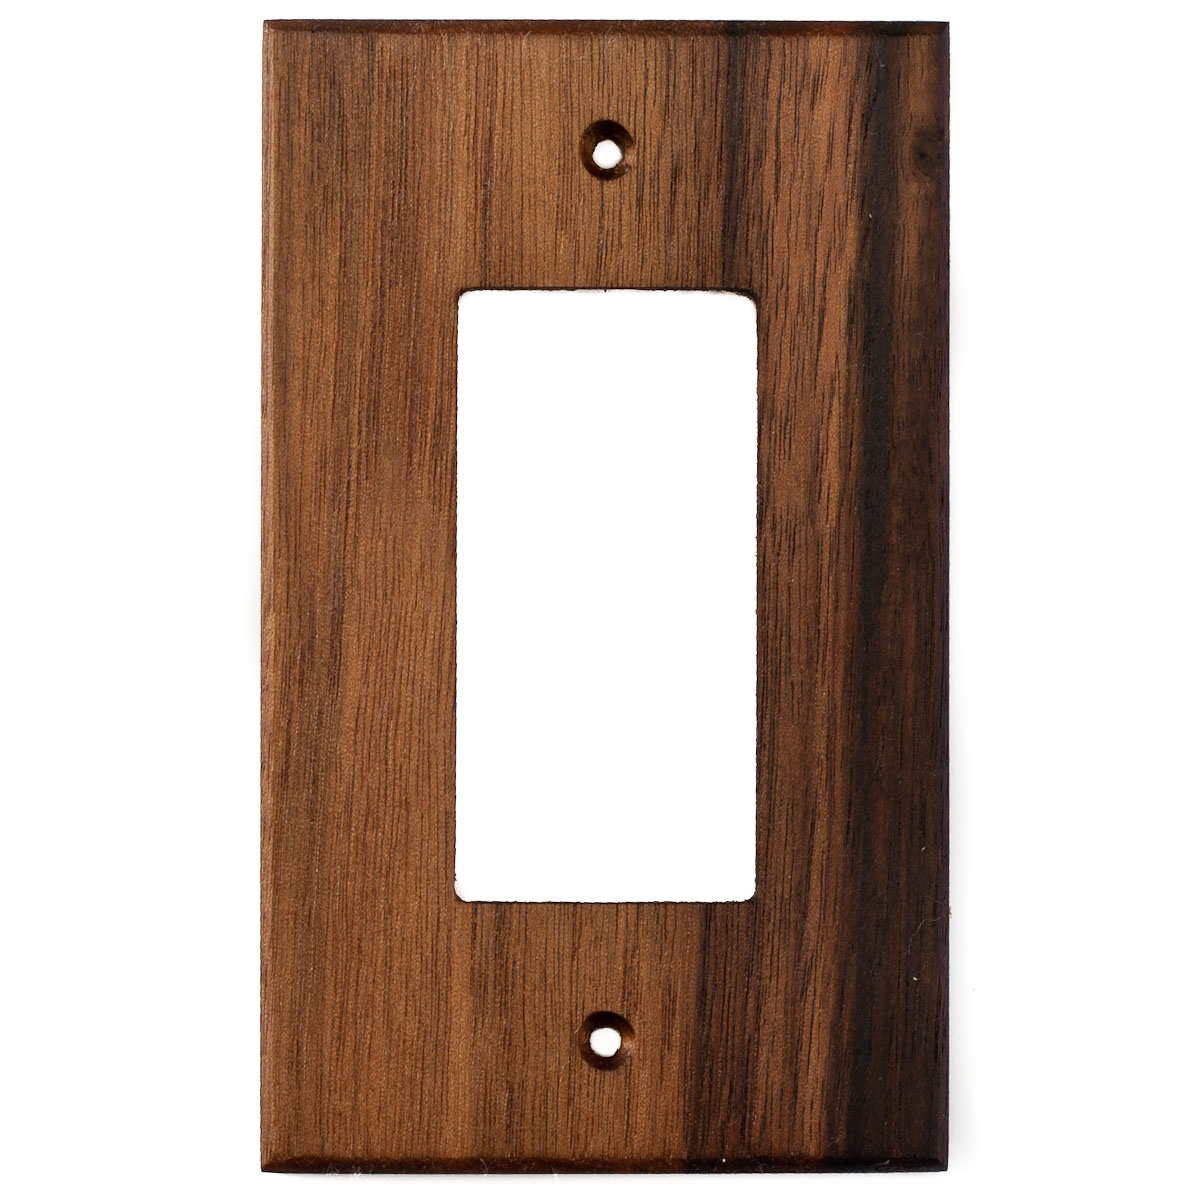 Black Walnut Wood Wall Plate - 1 Gang GFCI Outlet Cover - Virgin Timber  Lumber